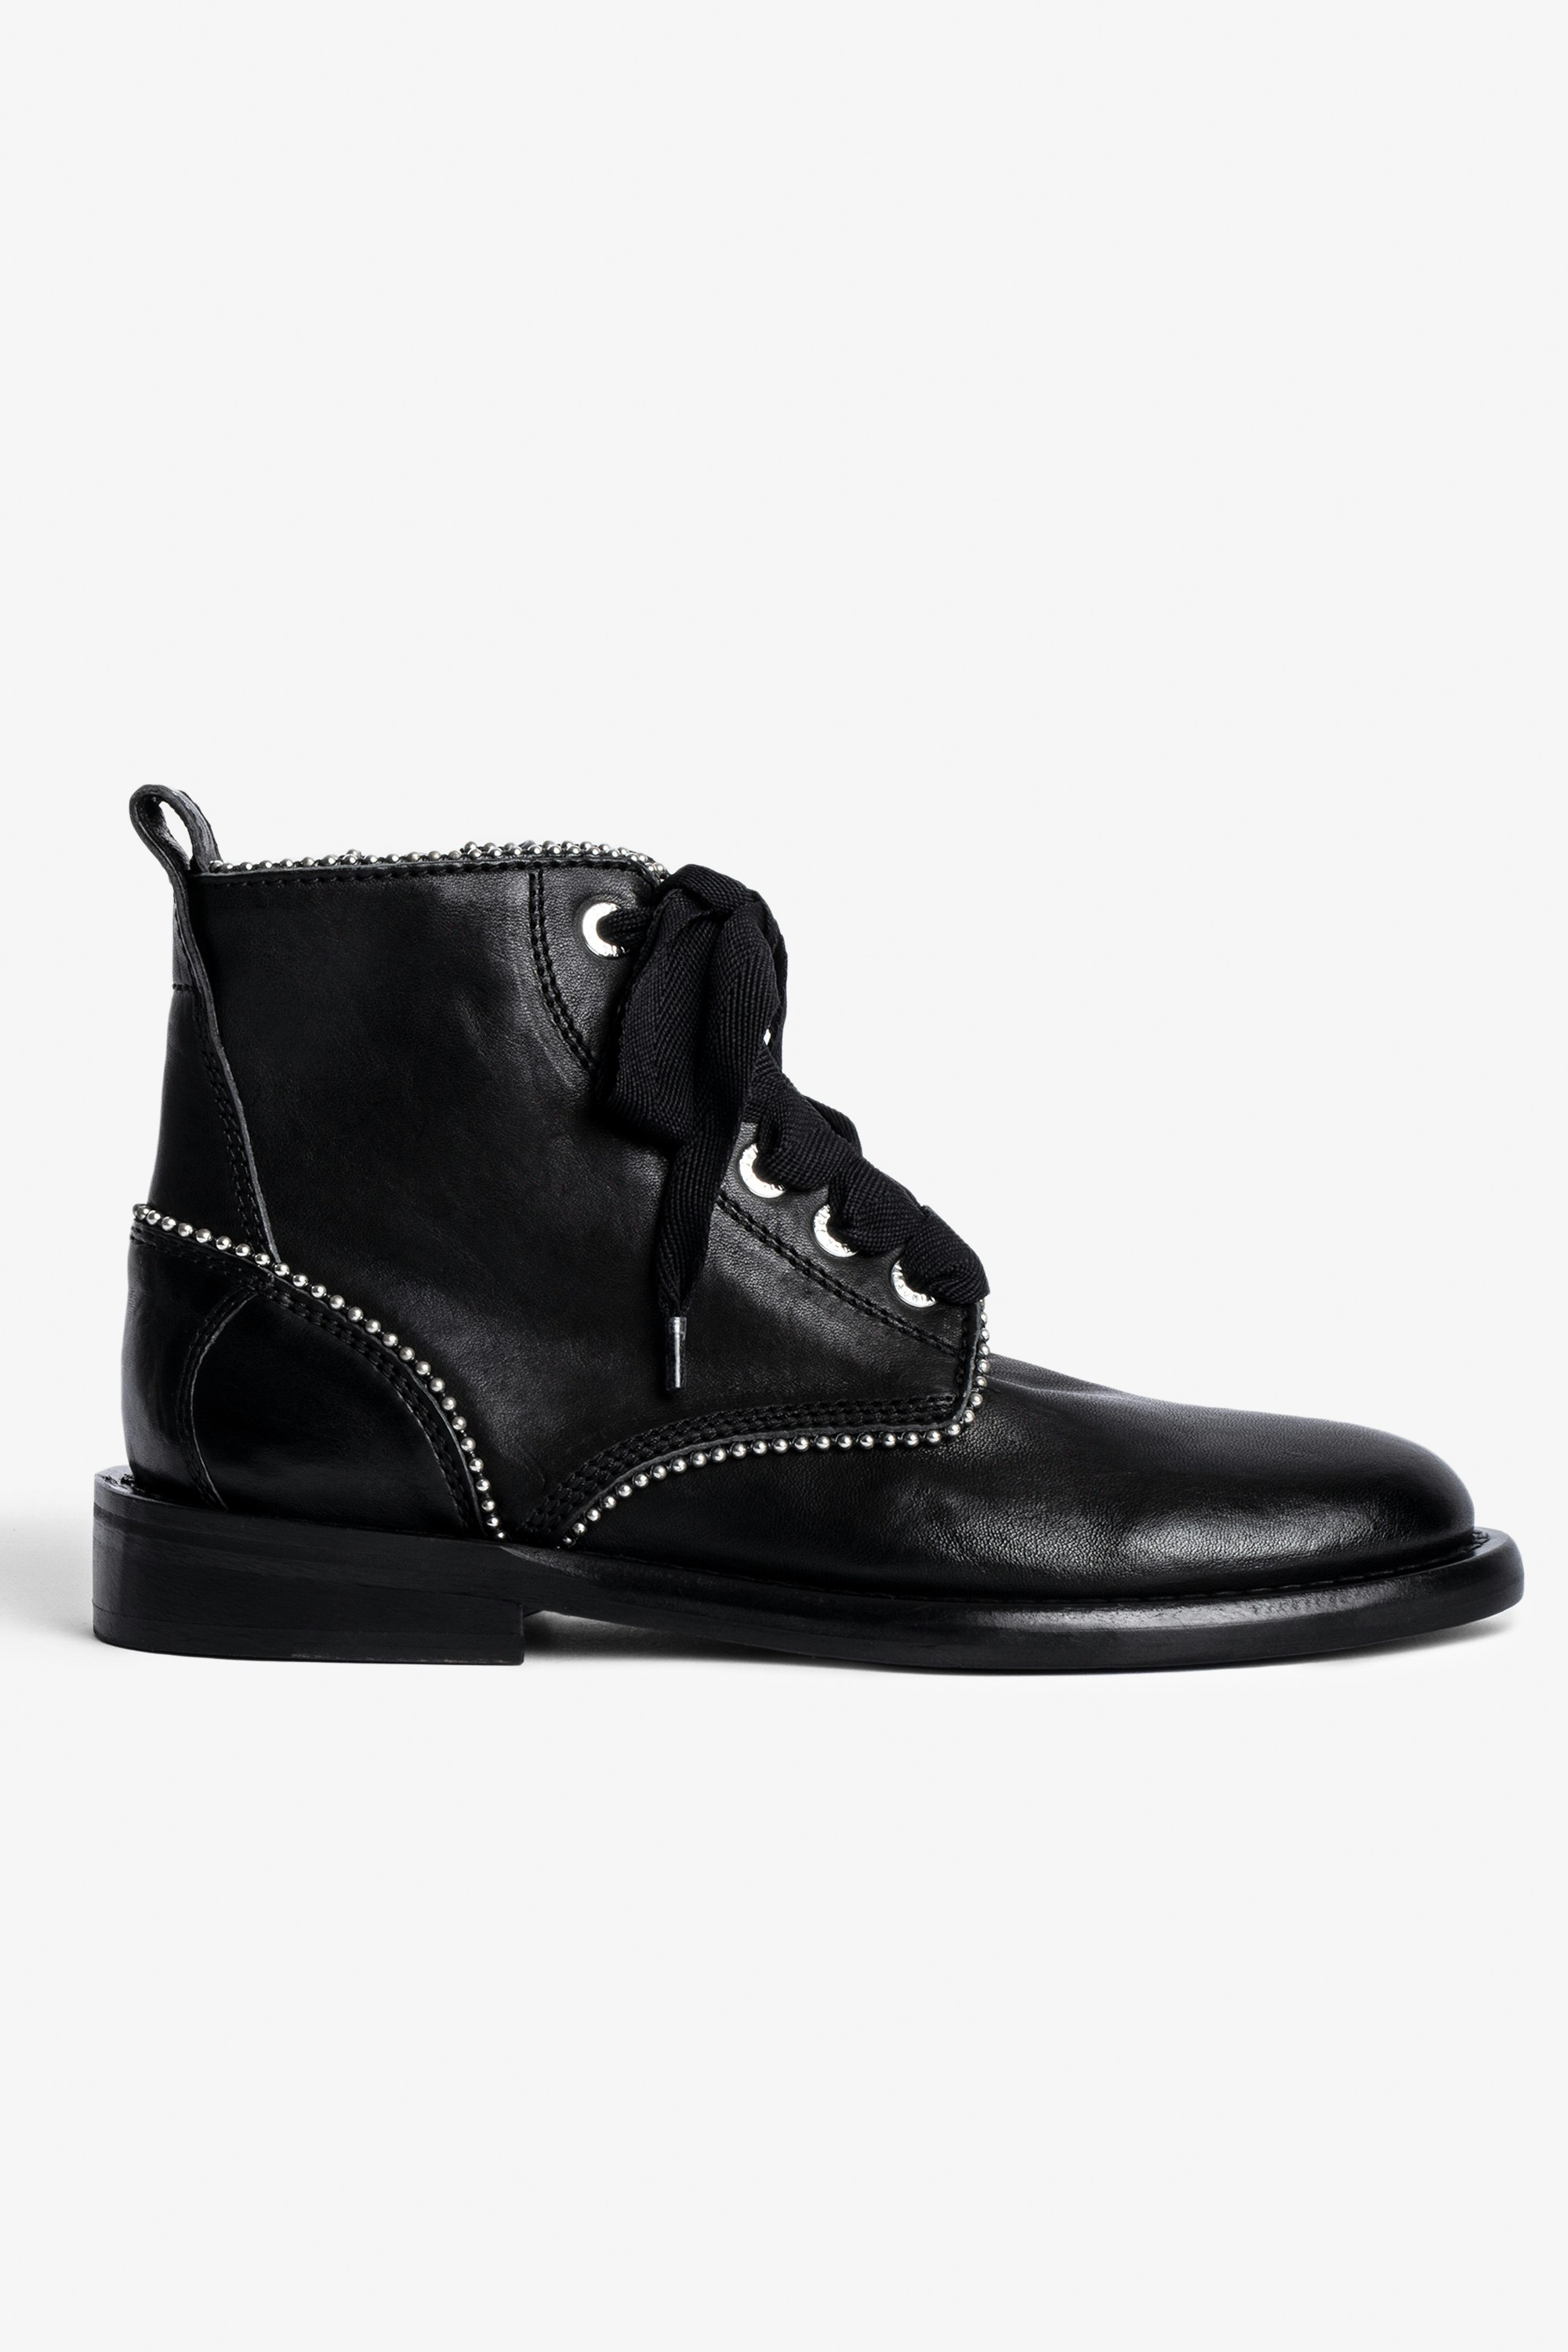 Laureen Roma Studs Ankle Boots Women’s black leather lace-up ankle boots